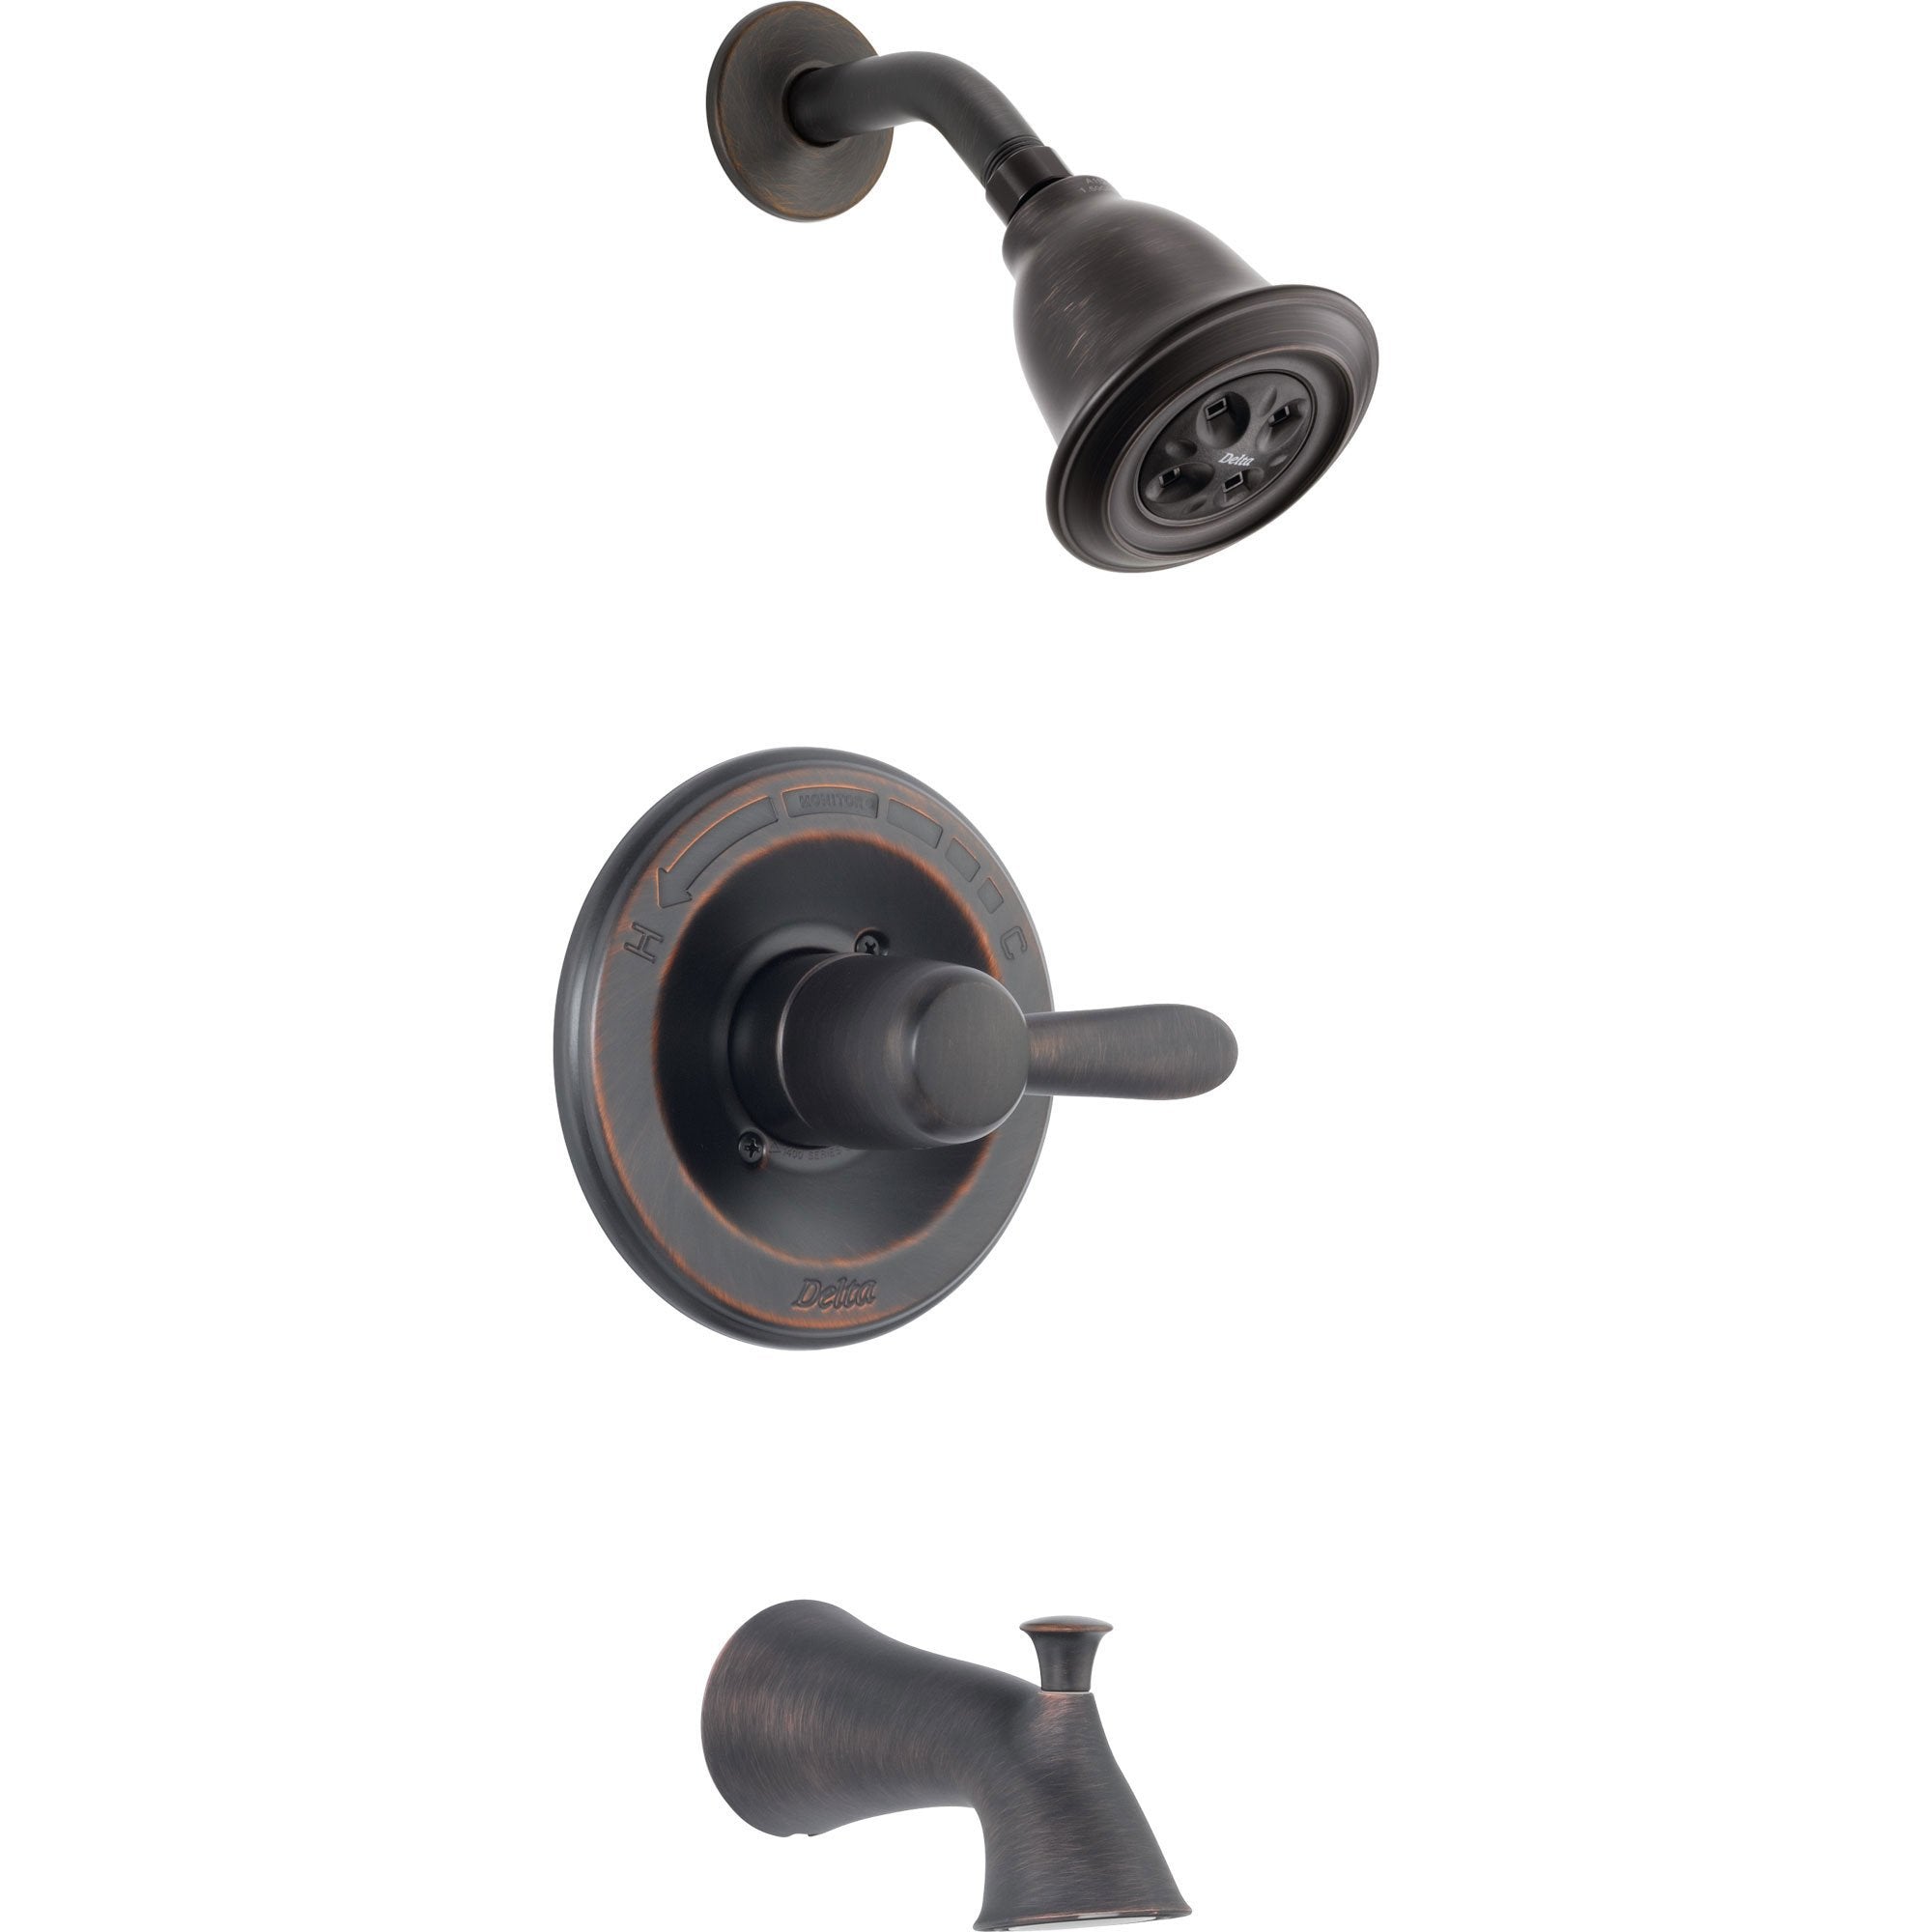 Delta Lahara Venetian Bronze Tub and Shower Combination Faucet with Valve D243V